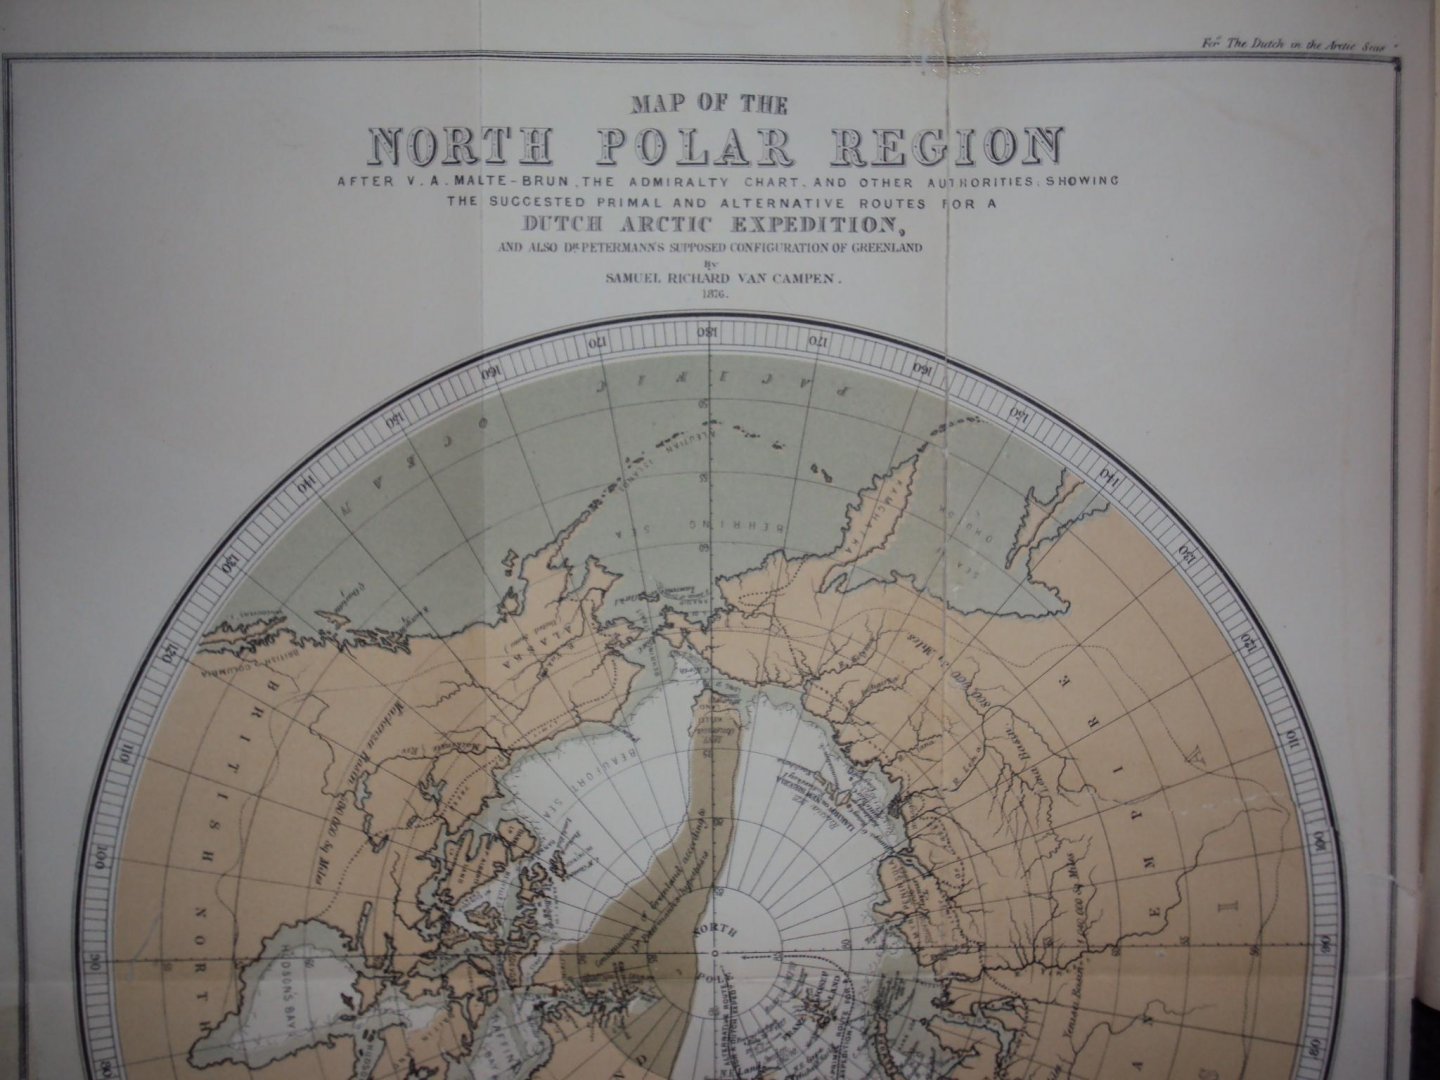 Samuel Richard van Campen - The Dutch in the Arctic seas. A Dutch Arctic expedition and route: Being a survey of the North Polar question